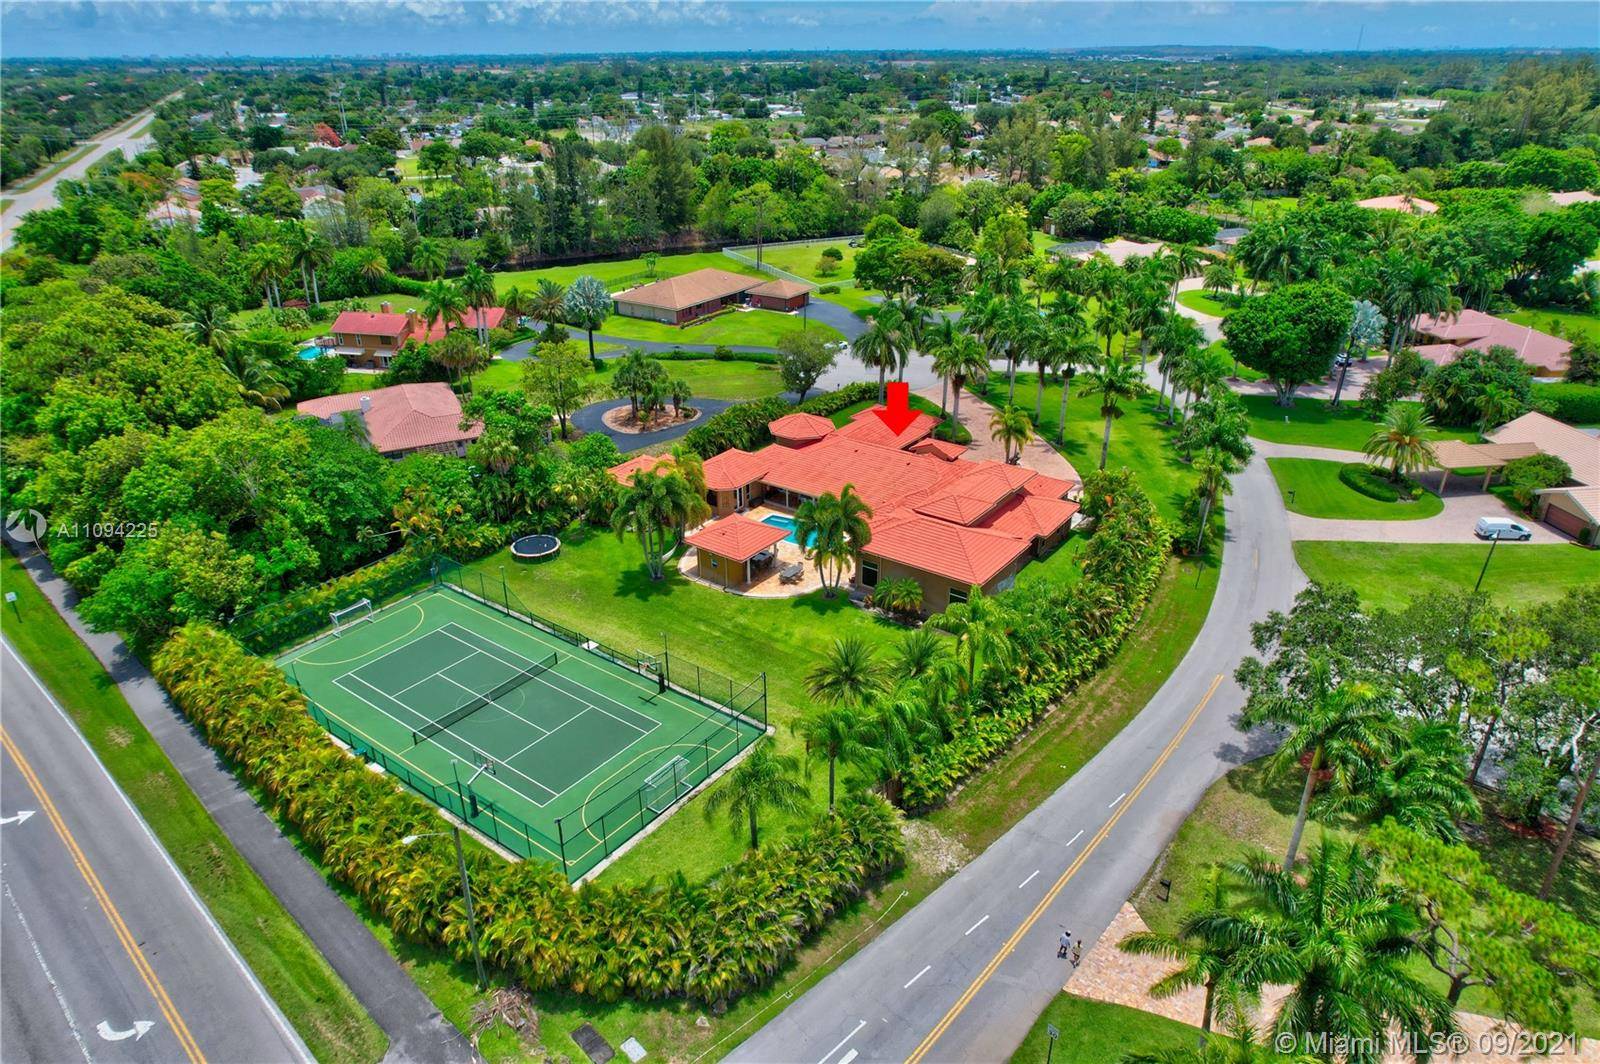 Spectacular 7, 255 sq ft custom estate in West Boca Raton with PRIVATE TENNIS court situated on a pristine 1.